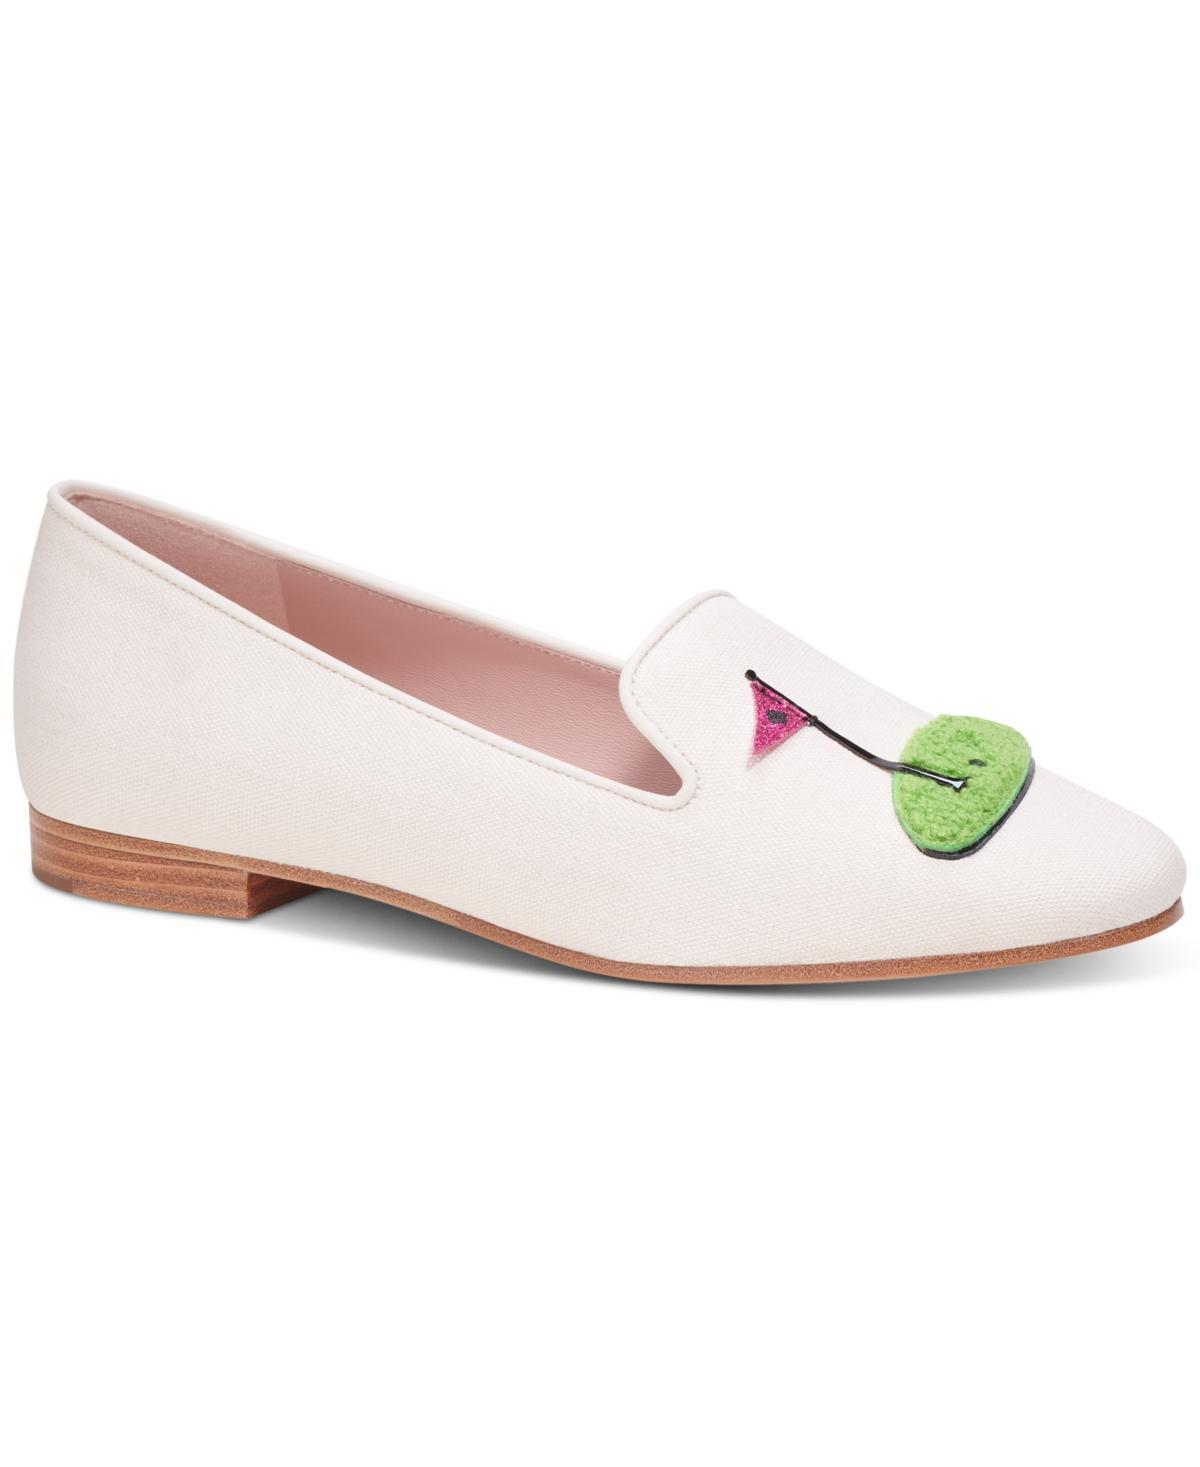 kate spade new york lounge golf loafer Product Image